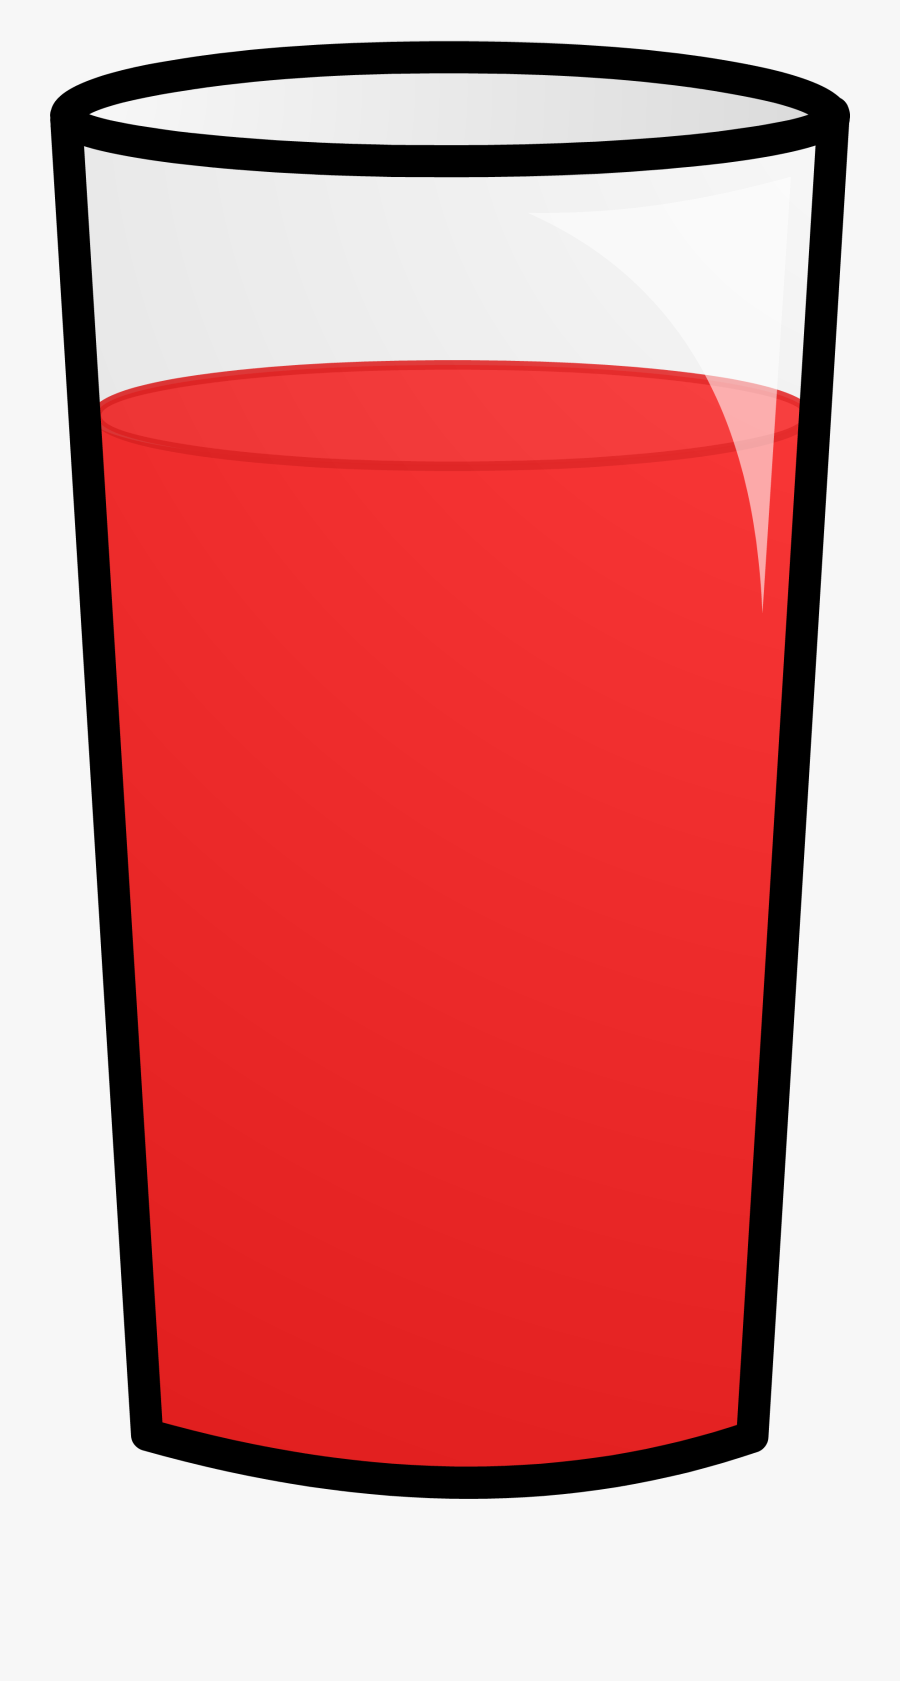 Thumb Image - Glass Of Fruit Punch Clip Art, Transparent Clipart